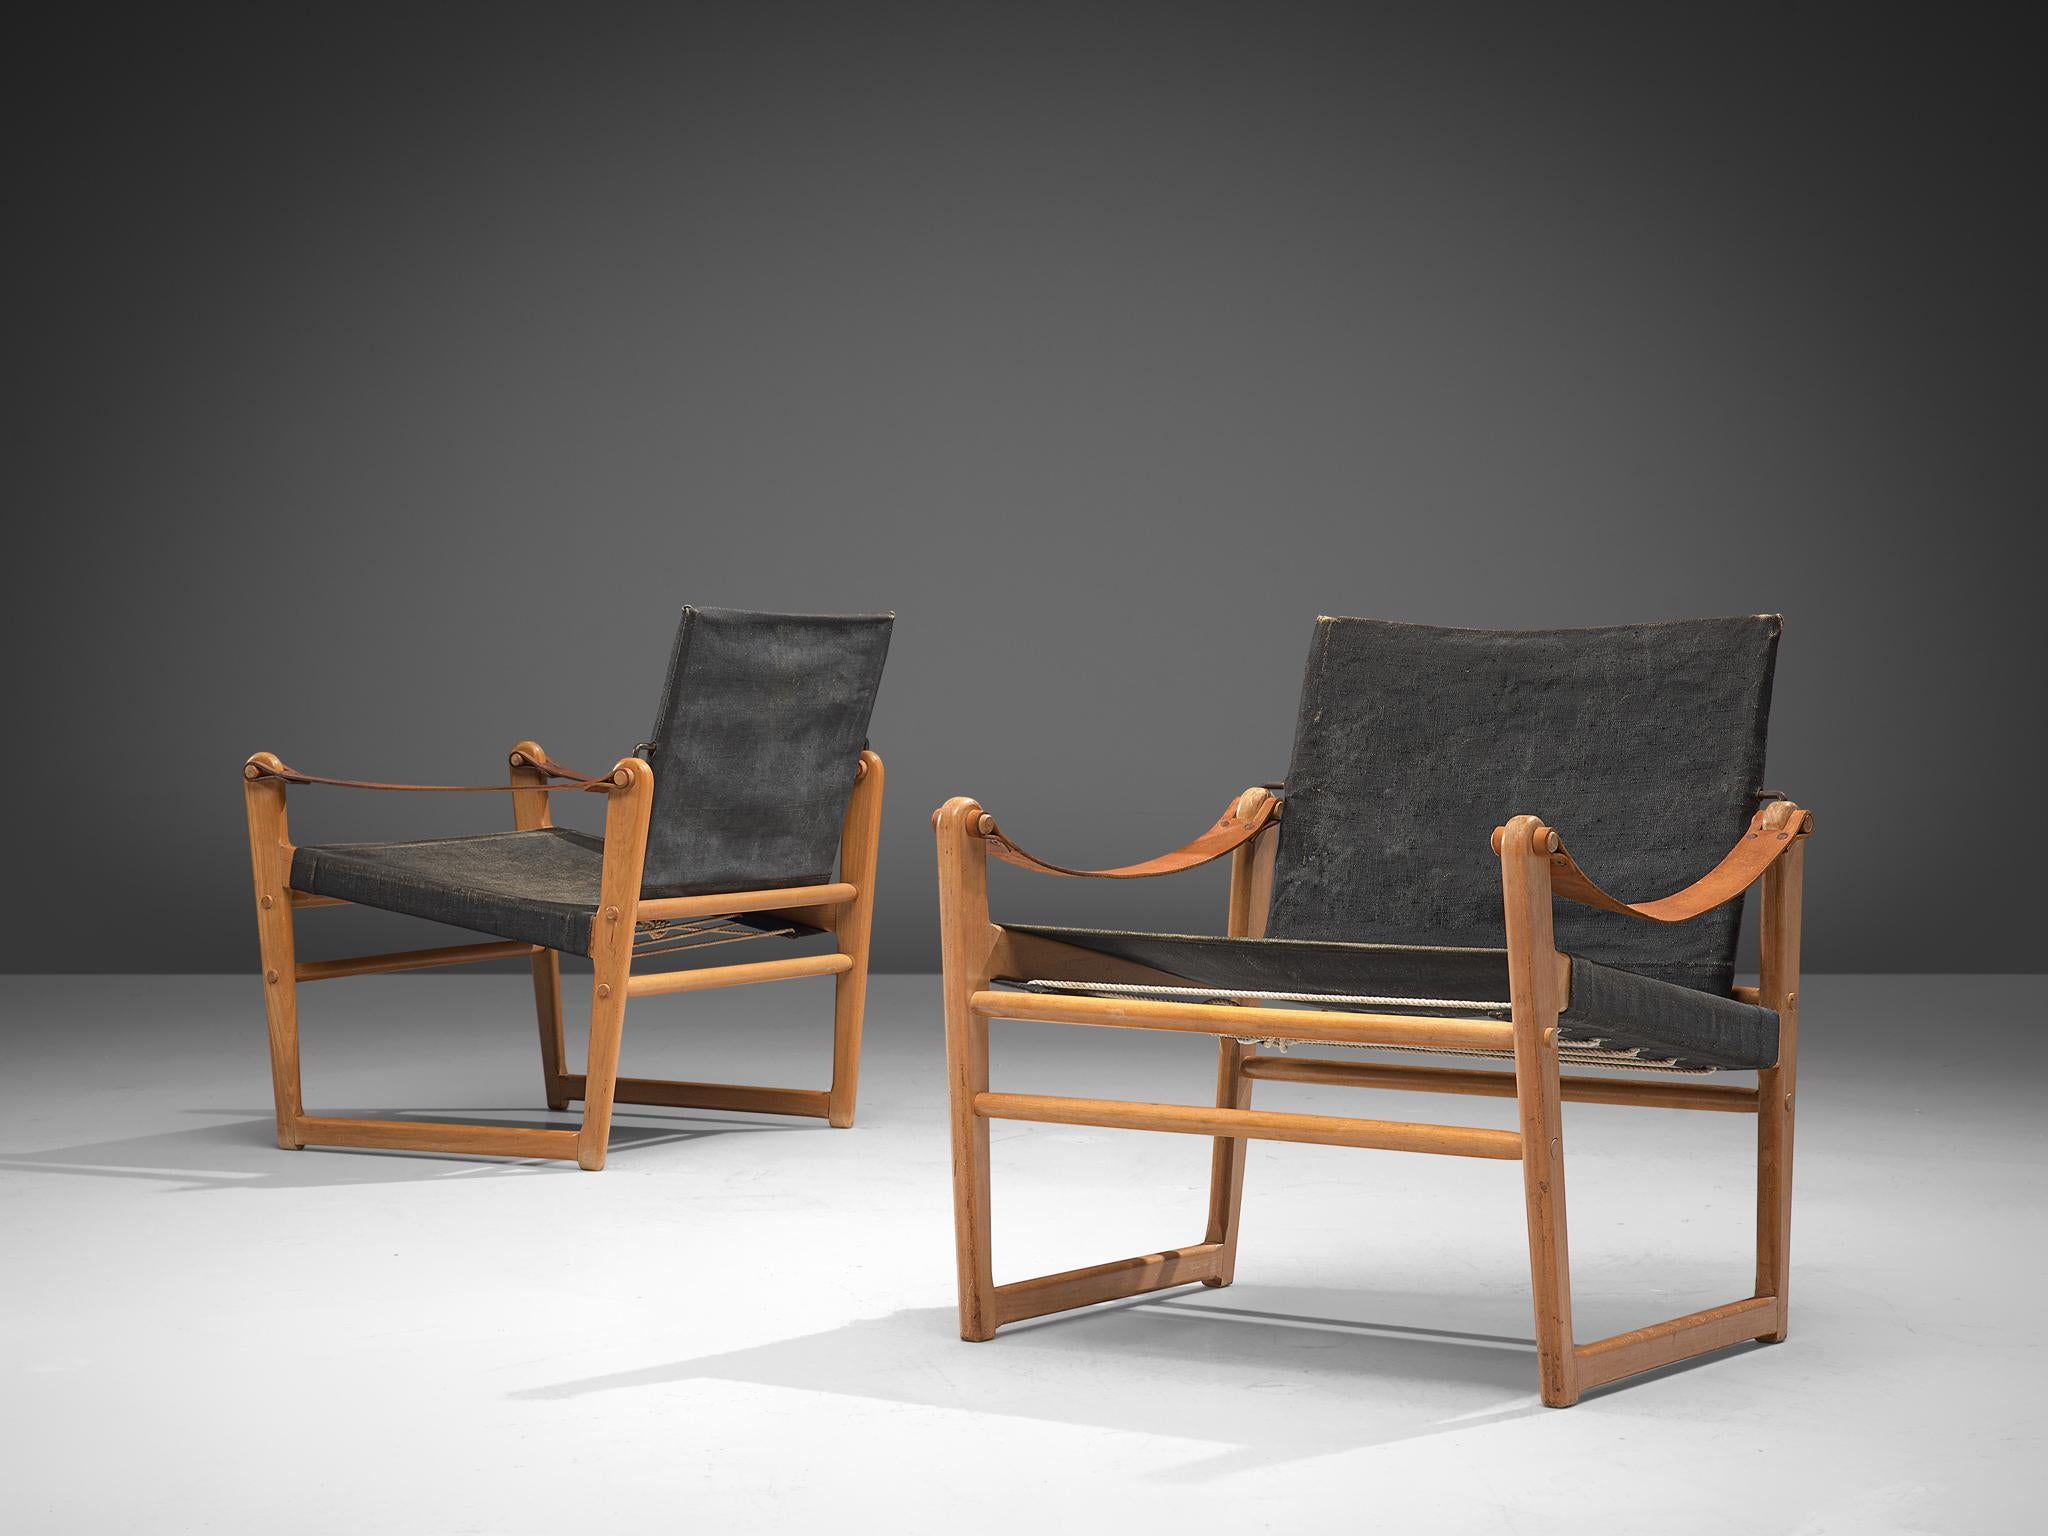 Pair of safari chairs, canvas, beech and leather, Denmark, 1960s

A sturdy pair of safari chairs executed in natural materials beech, canvas and leather. The beech frame is is executed with tapered legs. The canvas seat is strapped on the bottom.